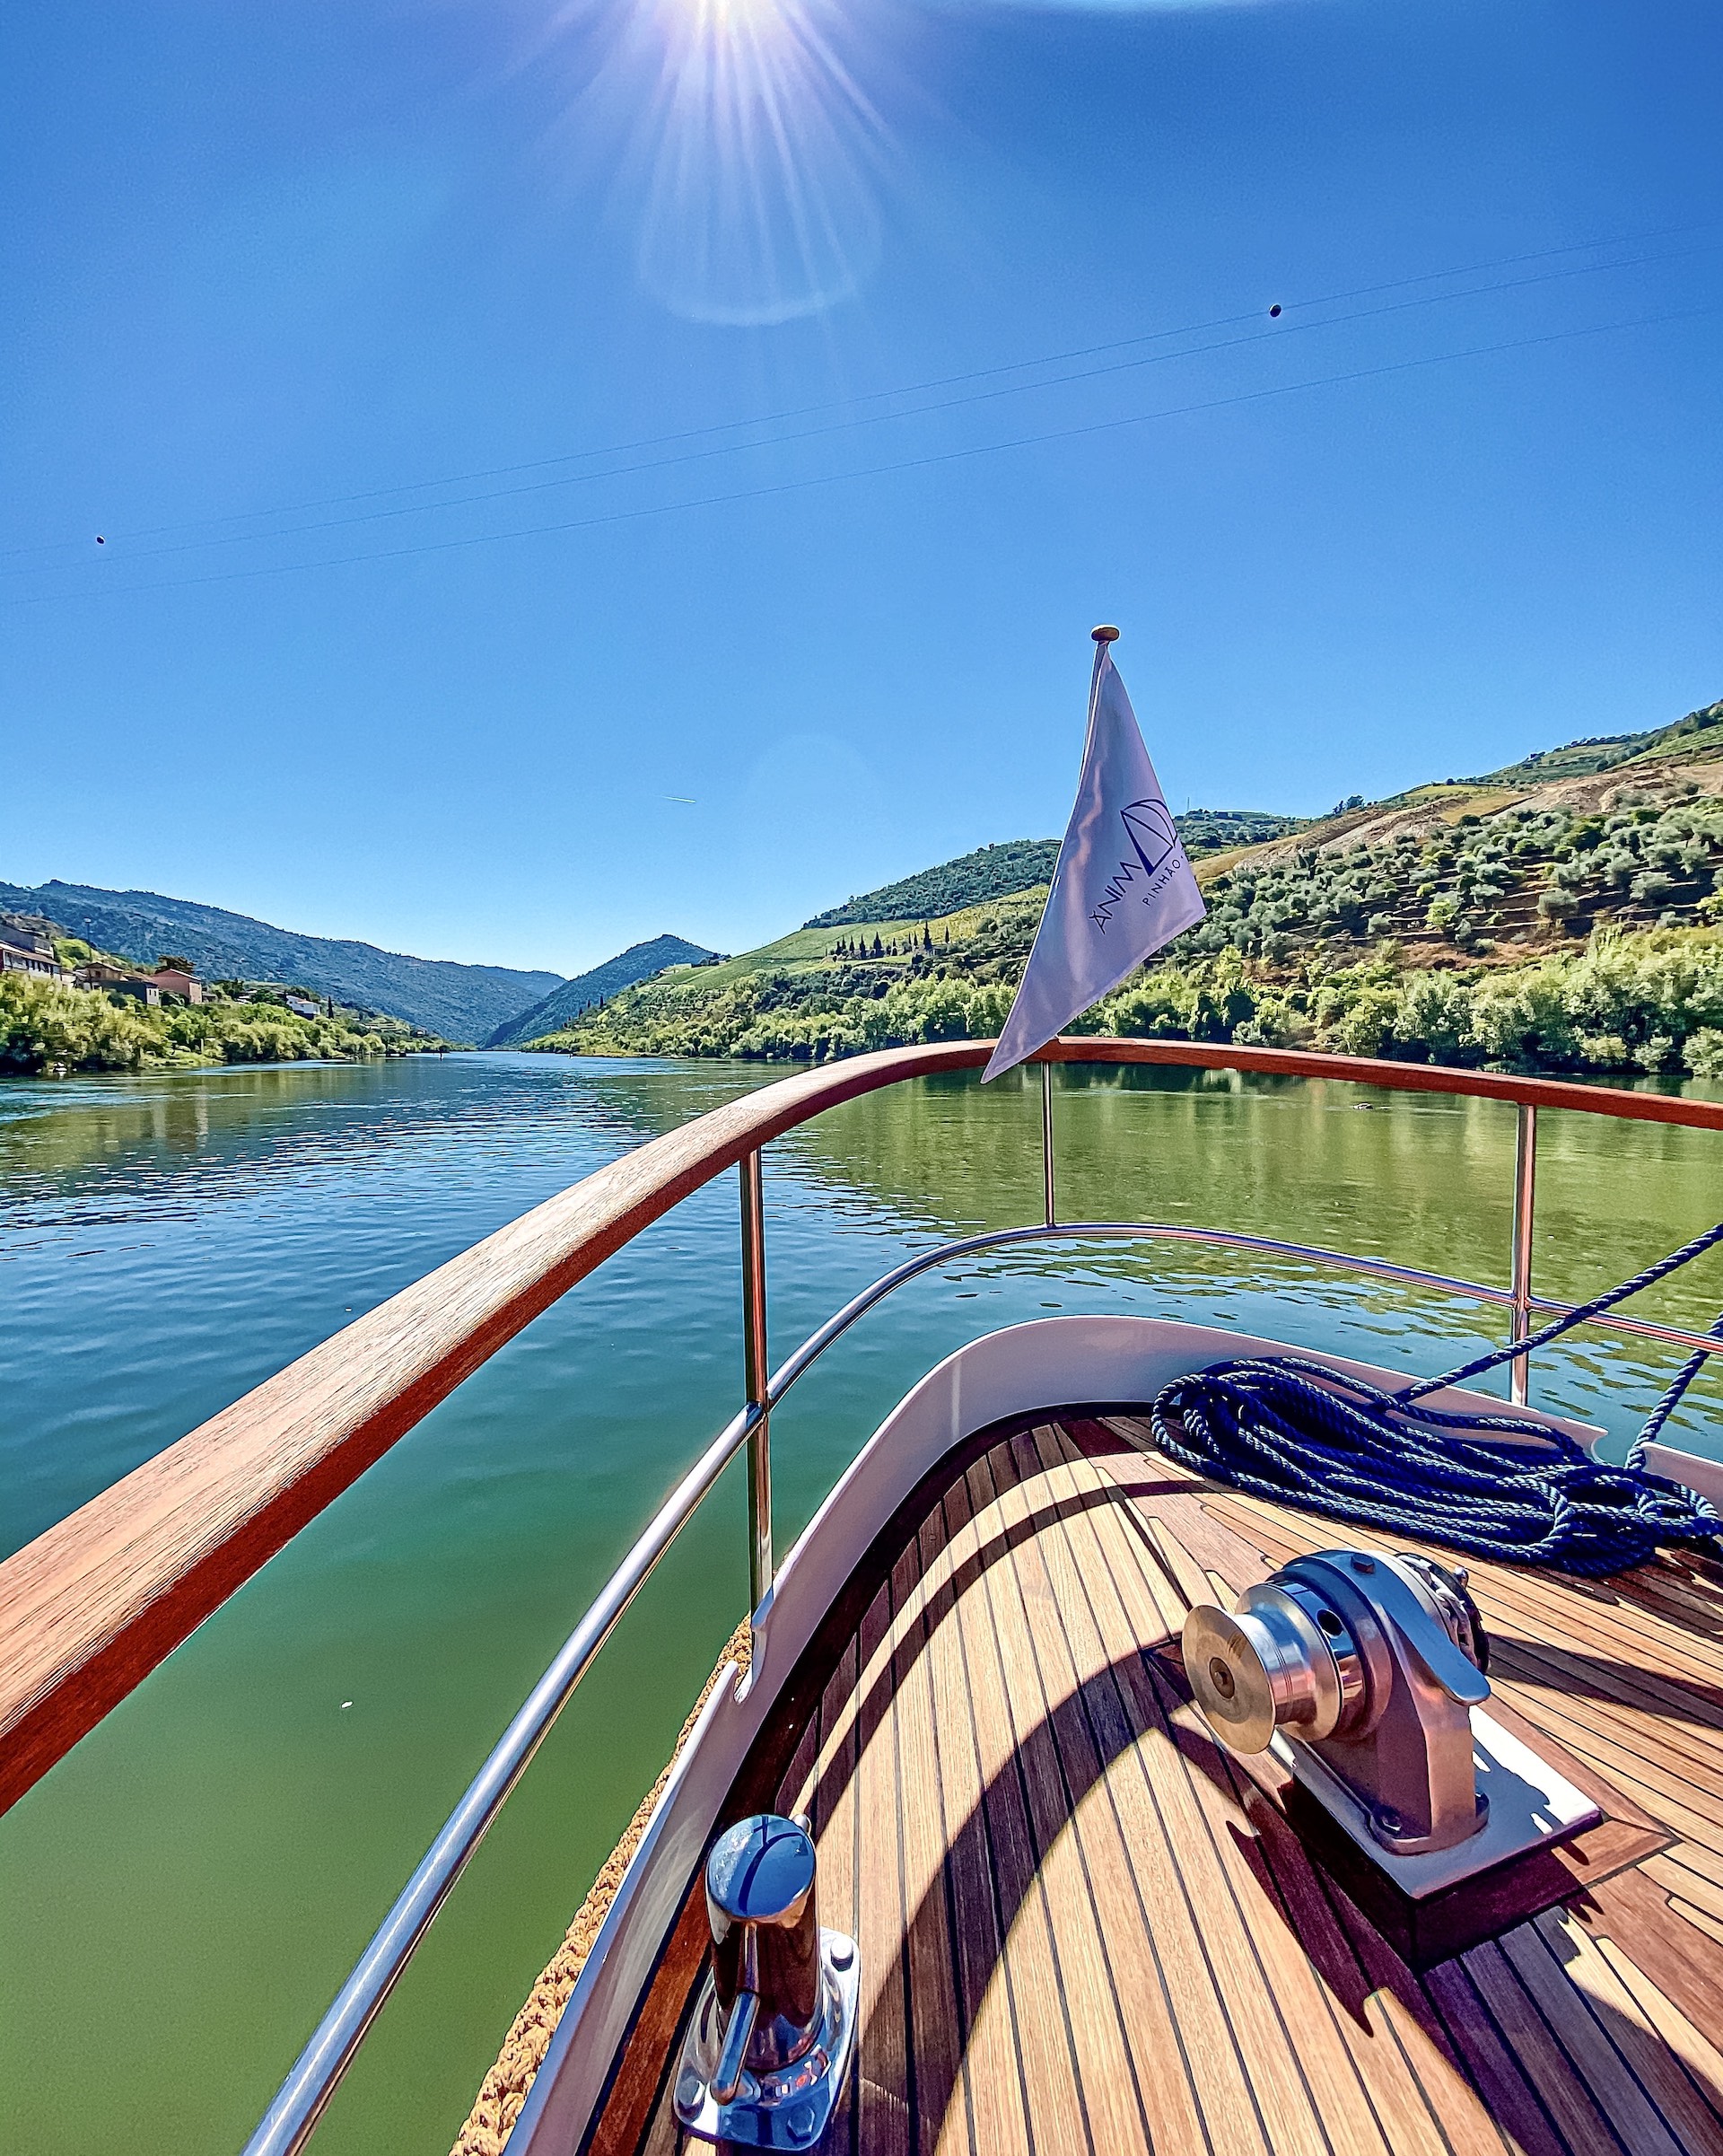 Explore the region of the Douro Valley by boat